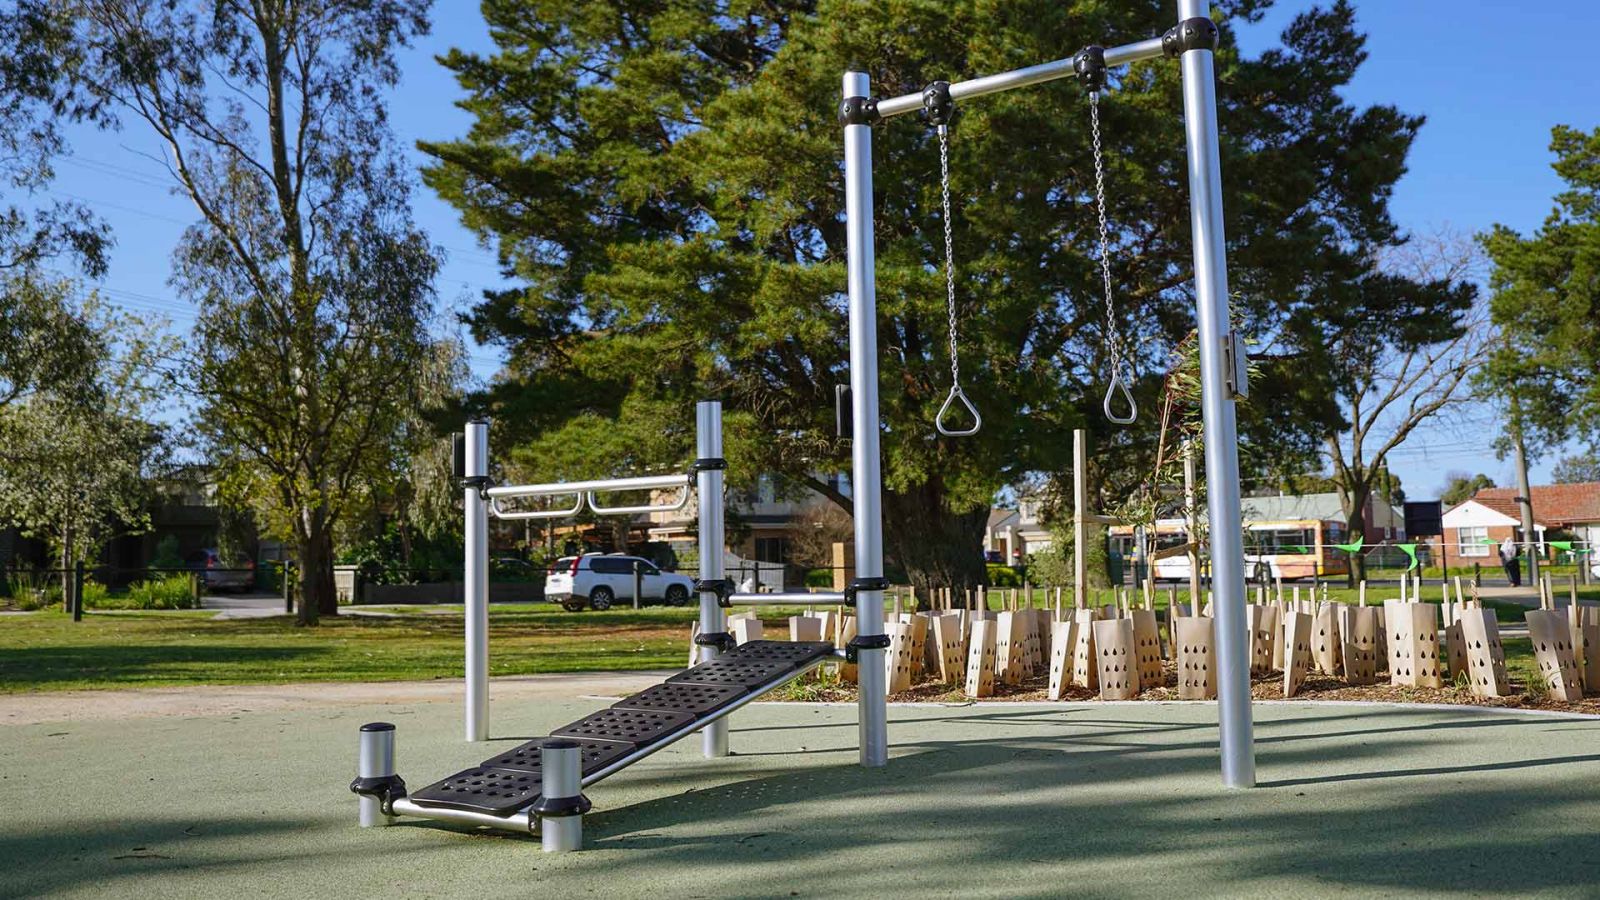 Outdoor fitness exercise station at Ford Park featuring a sit up bench, pull up rings and bar equipment. 